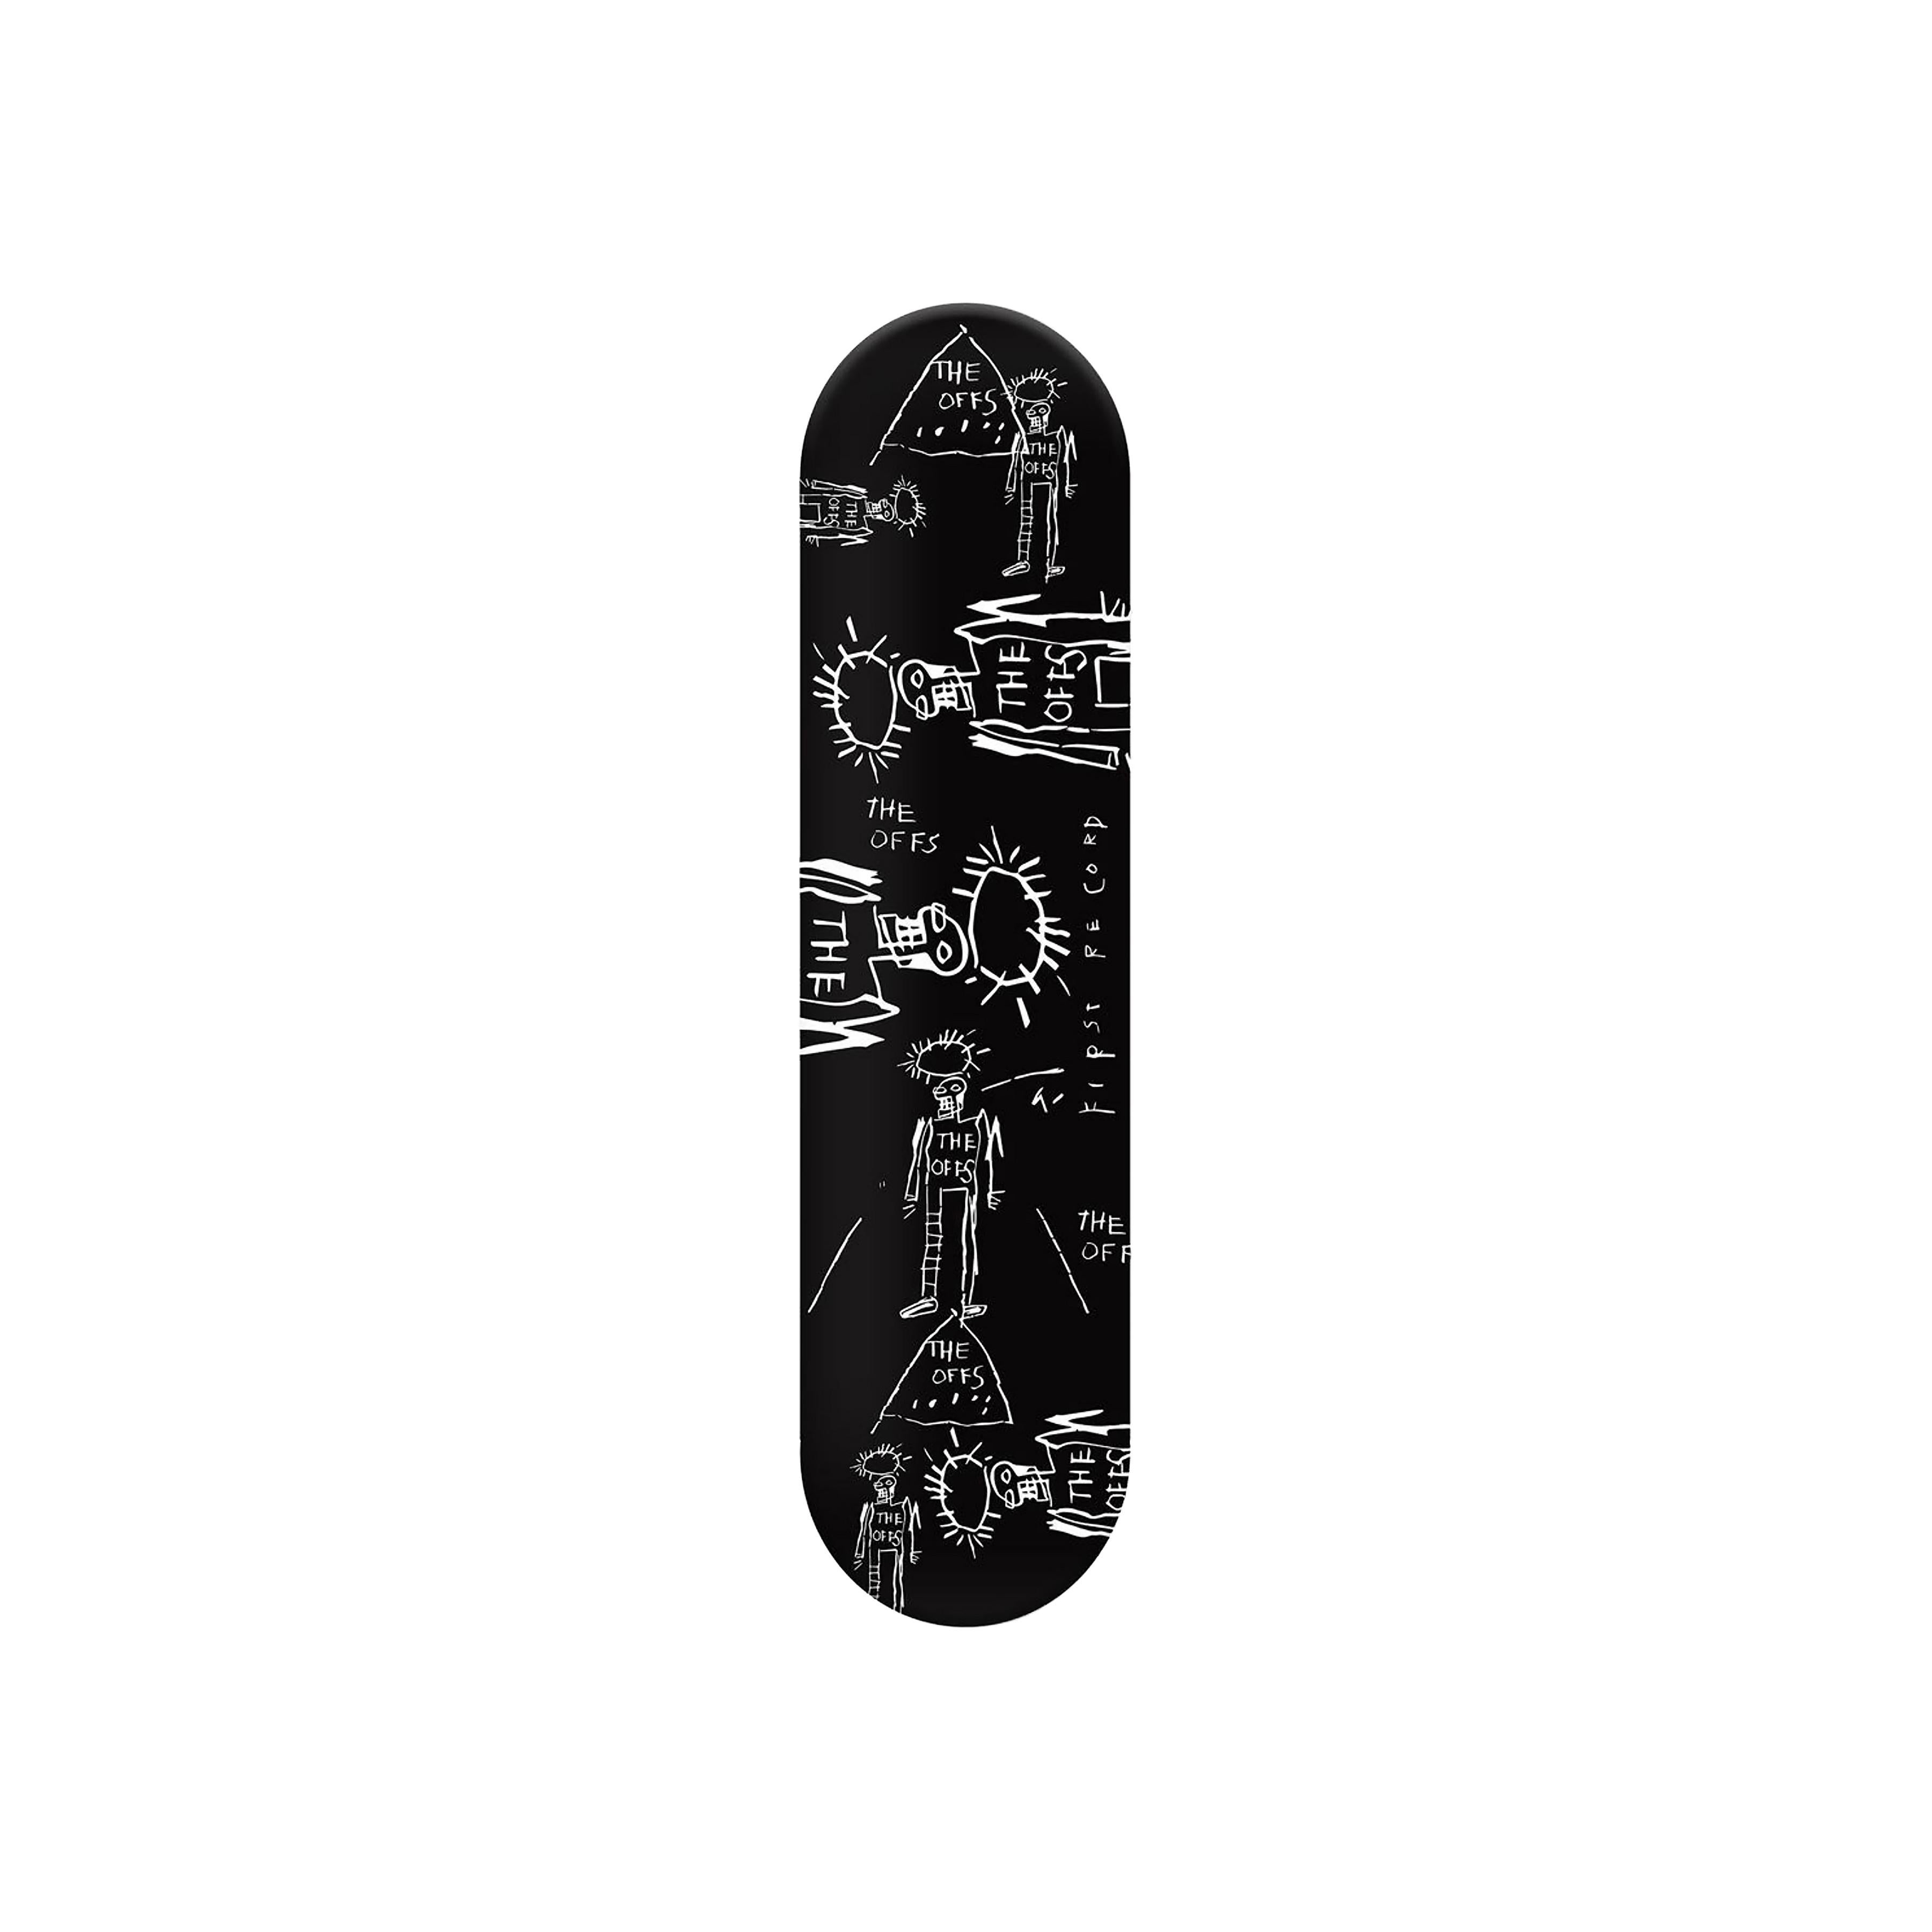 The OFFS Limited Edition Skate Deck, Graphics from The OFFS First Record, Cover  - Mixed Media Art by after Jean-Michel Basquiat